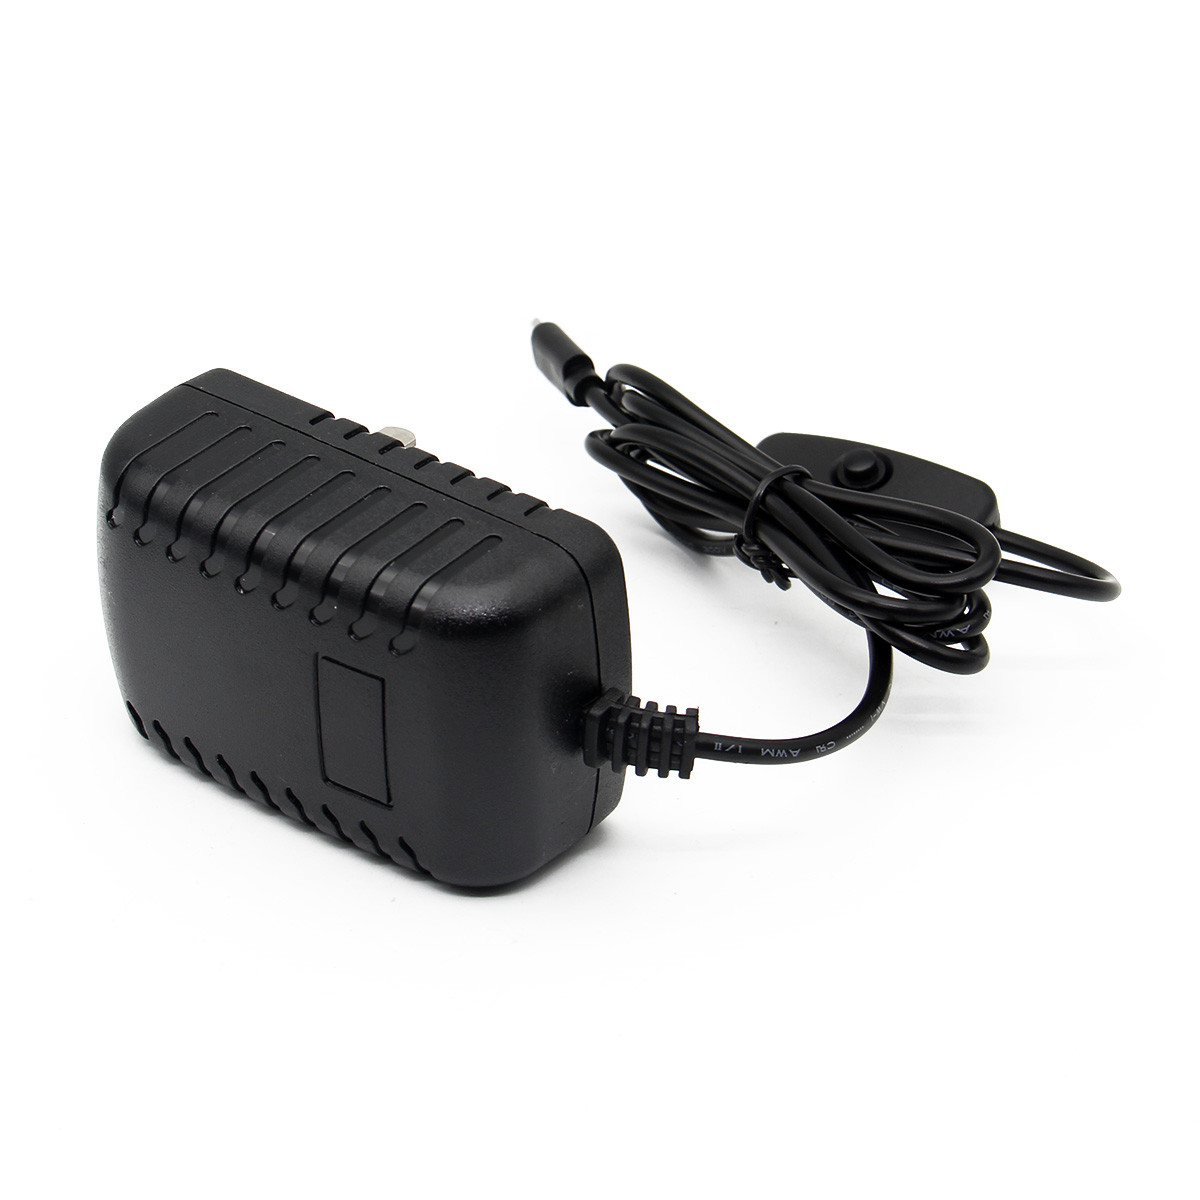 Geekworm US Standard DC 5V 3.0A Power Supply Adapter with Switch For Raspberry Pi 6